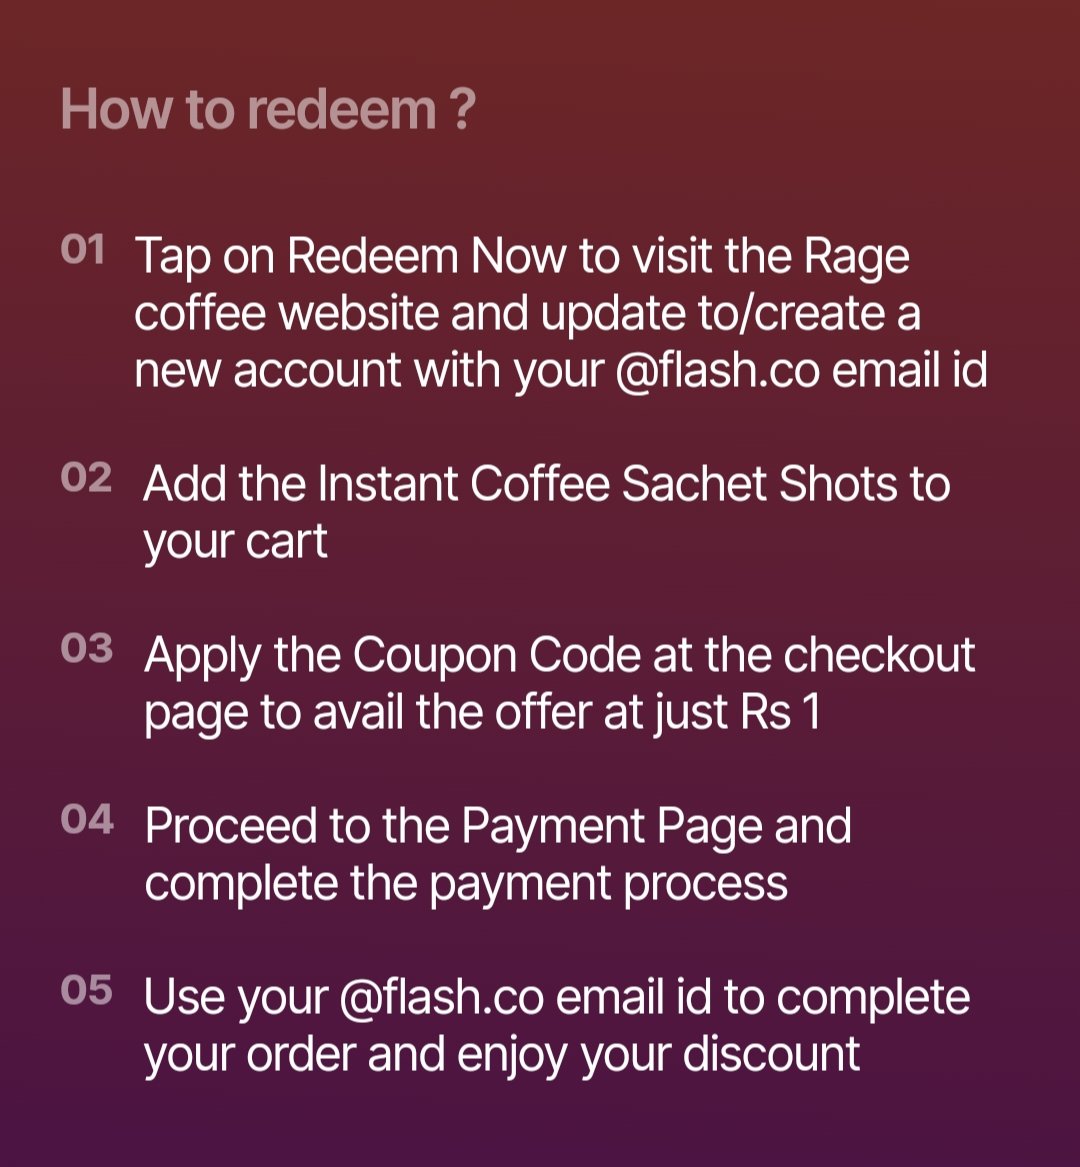 RAGE Coffee 60Gm @ ₹1🔥 ✨Courtesy flash. co app ✨An Email linked affiliate program Like ❤️ n Repost ♻️ if useful #ccgeek Please read detailed🧵below to know how Flash co works 👇 Disclaimer: ❌ Not a sponsored post Check the tncs carefully 🧐 DYOR